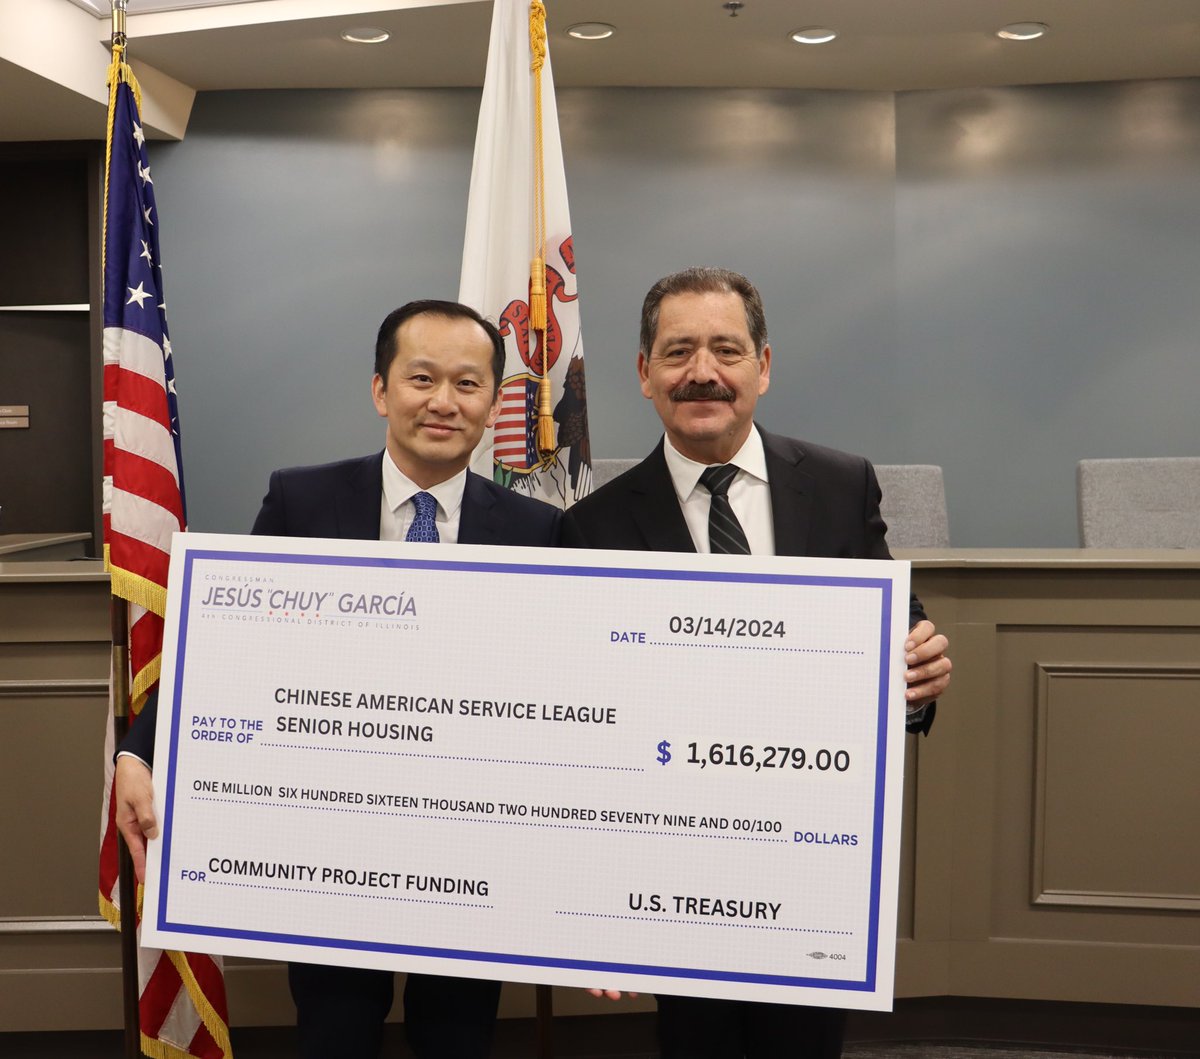 Congrats to @caslmedia on being one of this year’s community project funding recipients! I helped secure $1.6 million in funding to develop affordable senior housing serving Chicago’s Bridgeport neighborhood.